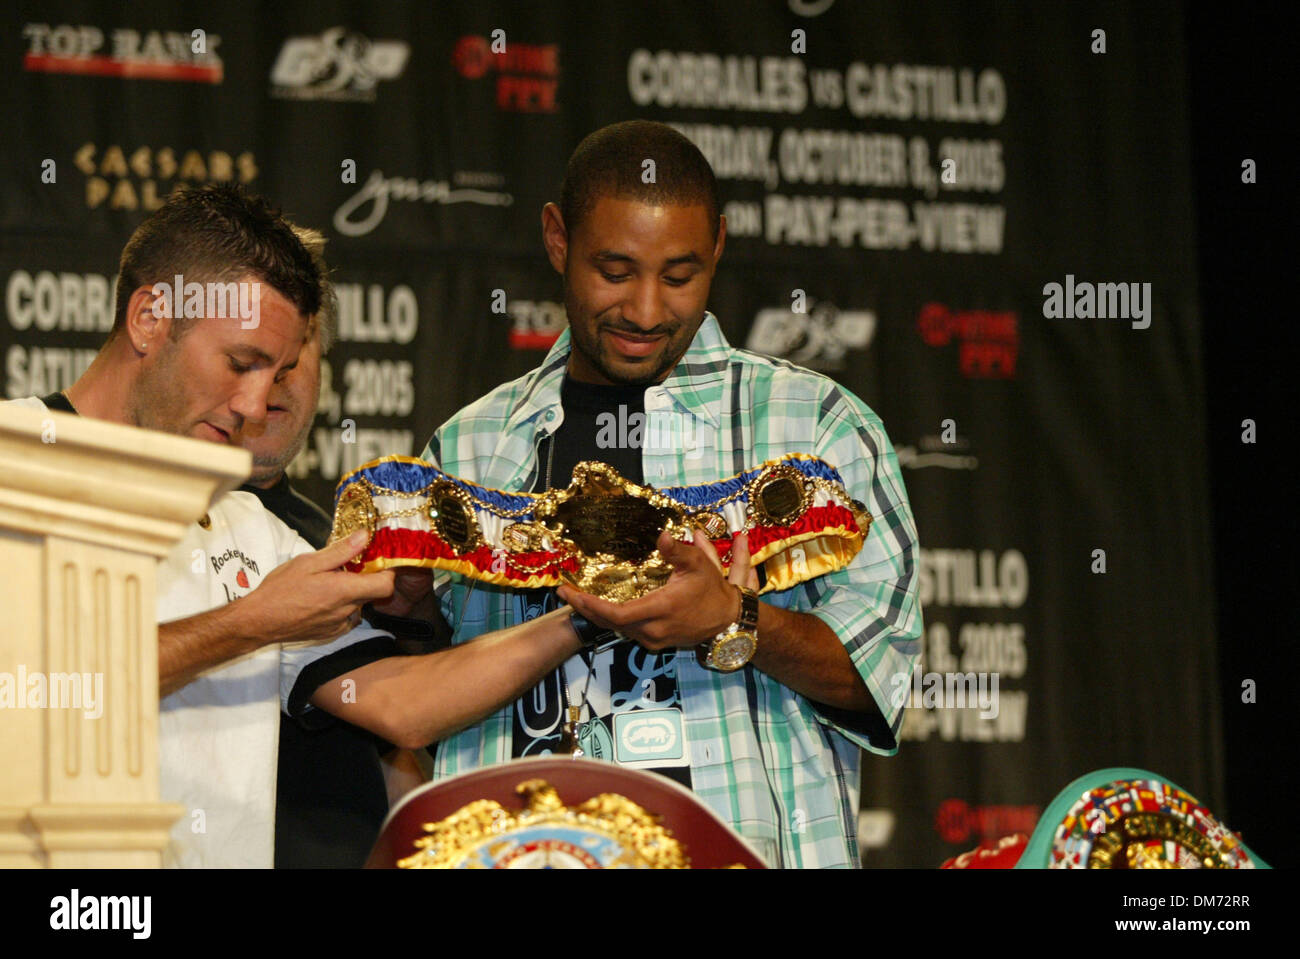 Jul 20, 2005; Las Vegas, NV, USA; Former Jr Bantamweight Champion WAYNE MCCULLOUGH presents DIEGO CORRALES with the most prestigous belt a fighter can receive, The Ring Magazine Belt. The Ring belt means that a fighter is the best in the World in his weight class.  The Ring Belt was presented at The 'Uno Mas' One More Time Press conference at Caesars Palace Hotel & Casino. CORRALES Stock Photo